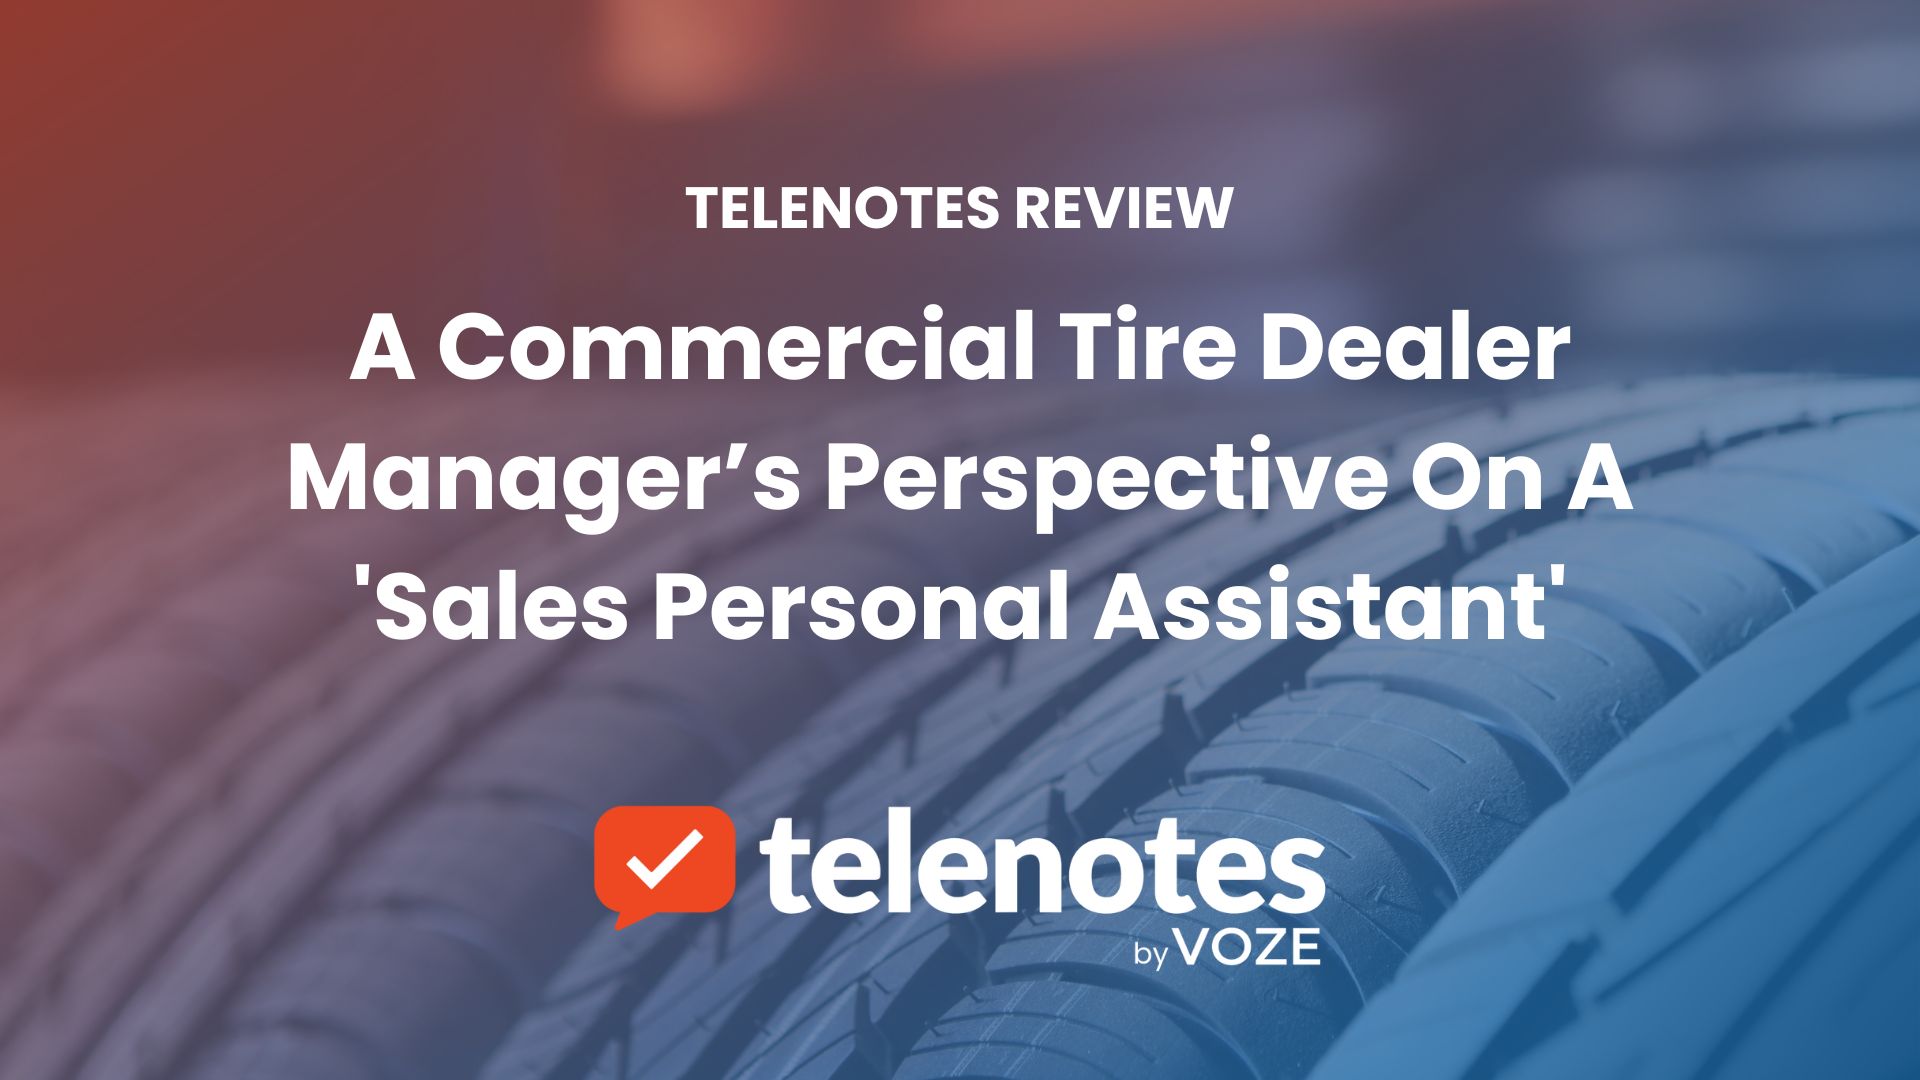 Telenotes Review: A Commercial Tire Dealer Manager’s Perspective On A ‘Sales Personal Assistant’